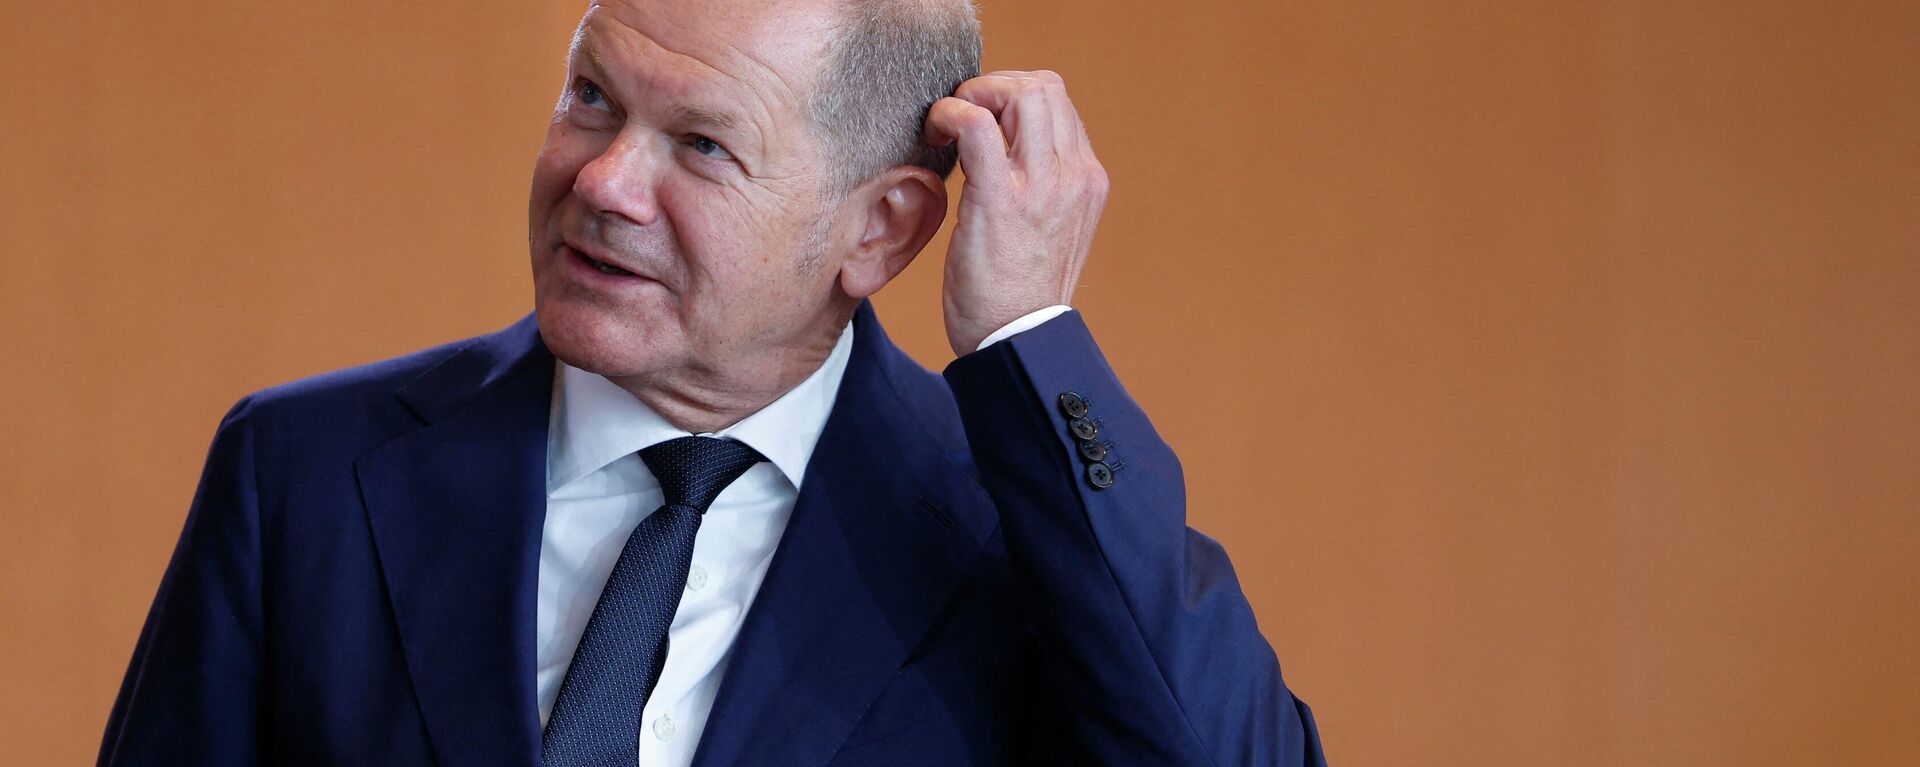 Germany's Chancellor Olaf Scholz scratches his head as he arrives for the weekly meeting of the German cabinet at the chancellery in Berlin on August 17, 2022 - Sputnik International, 1920, 19.08.2022